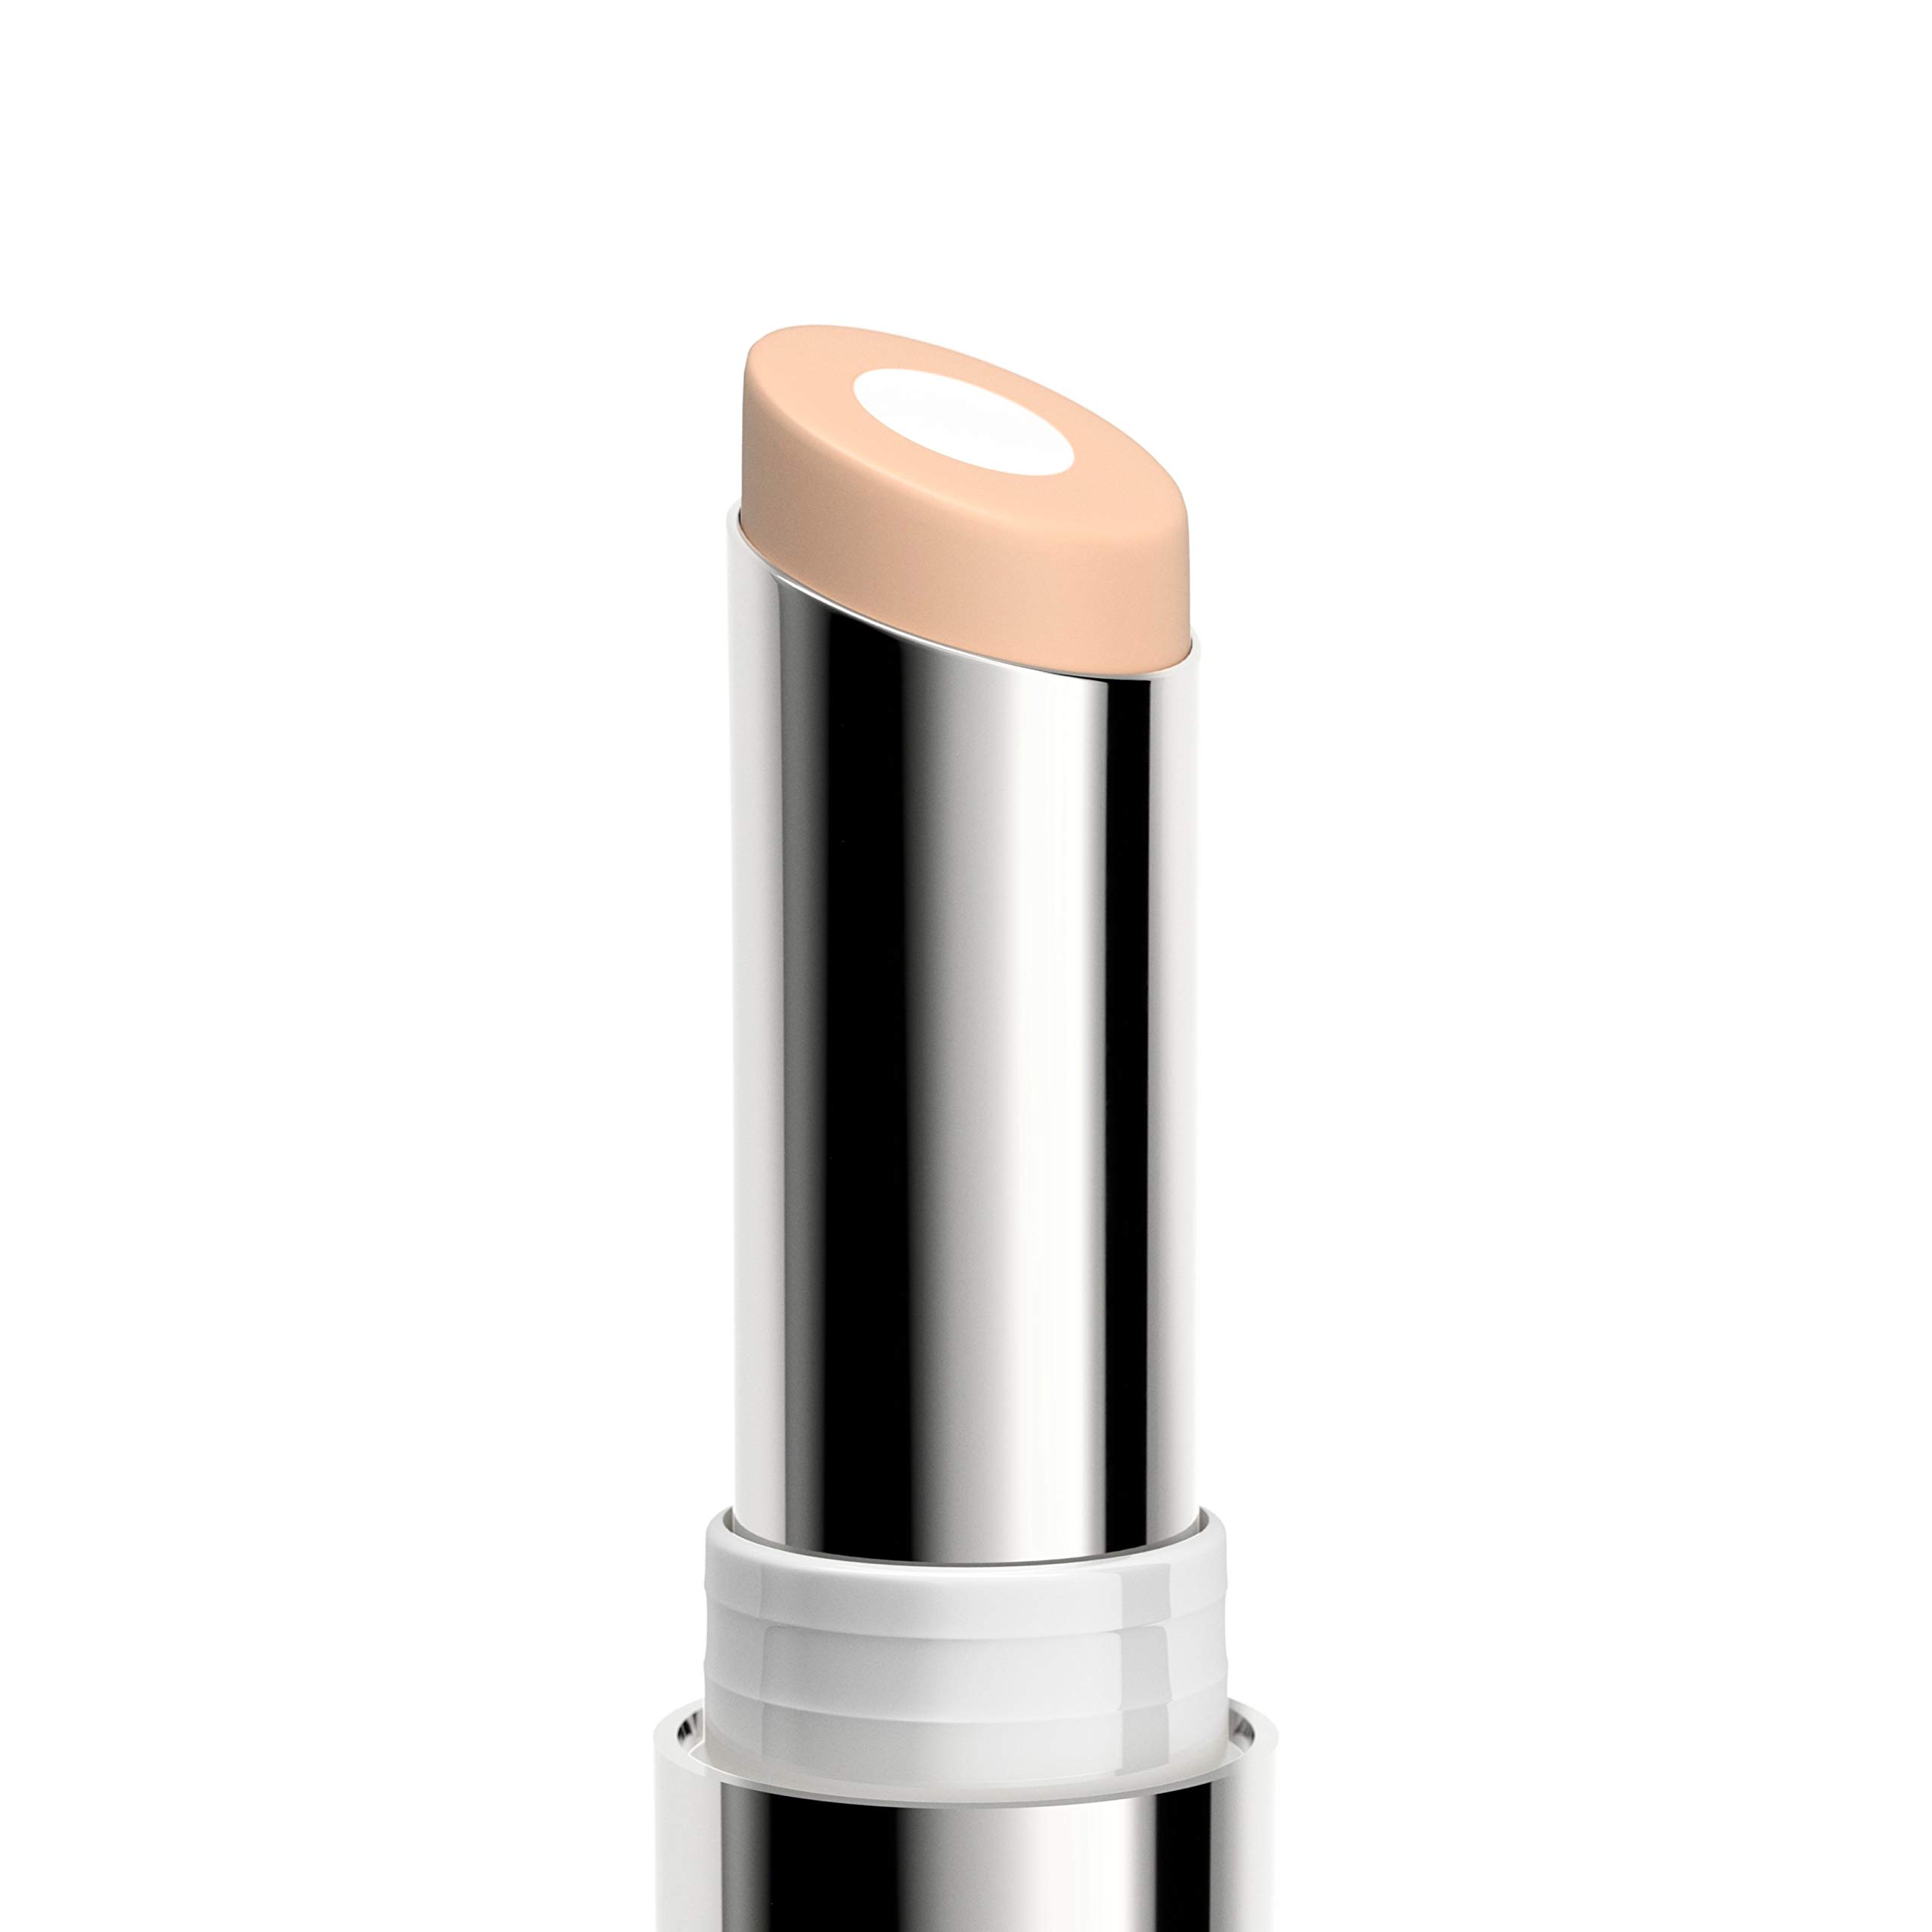 Neutrogena Hydro Boost Hydrating Concealer Stick for Dry Skin, Oil-Free, Lightweight, Non-Greasy and Non-Comedogenic Cover-Up Makeup with Hyaluronic Acid, 10/Fair, 0.12 Oz